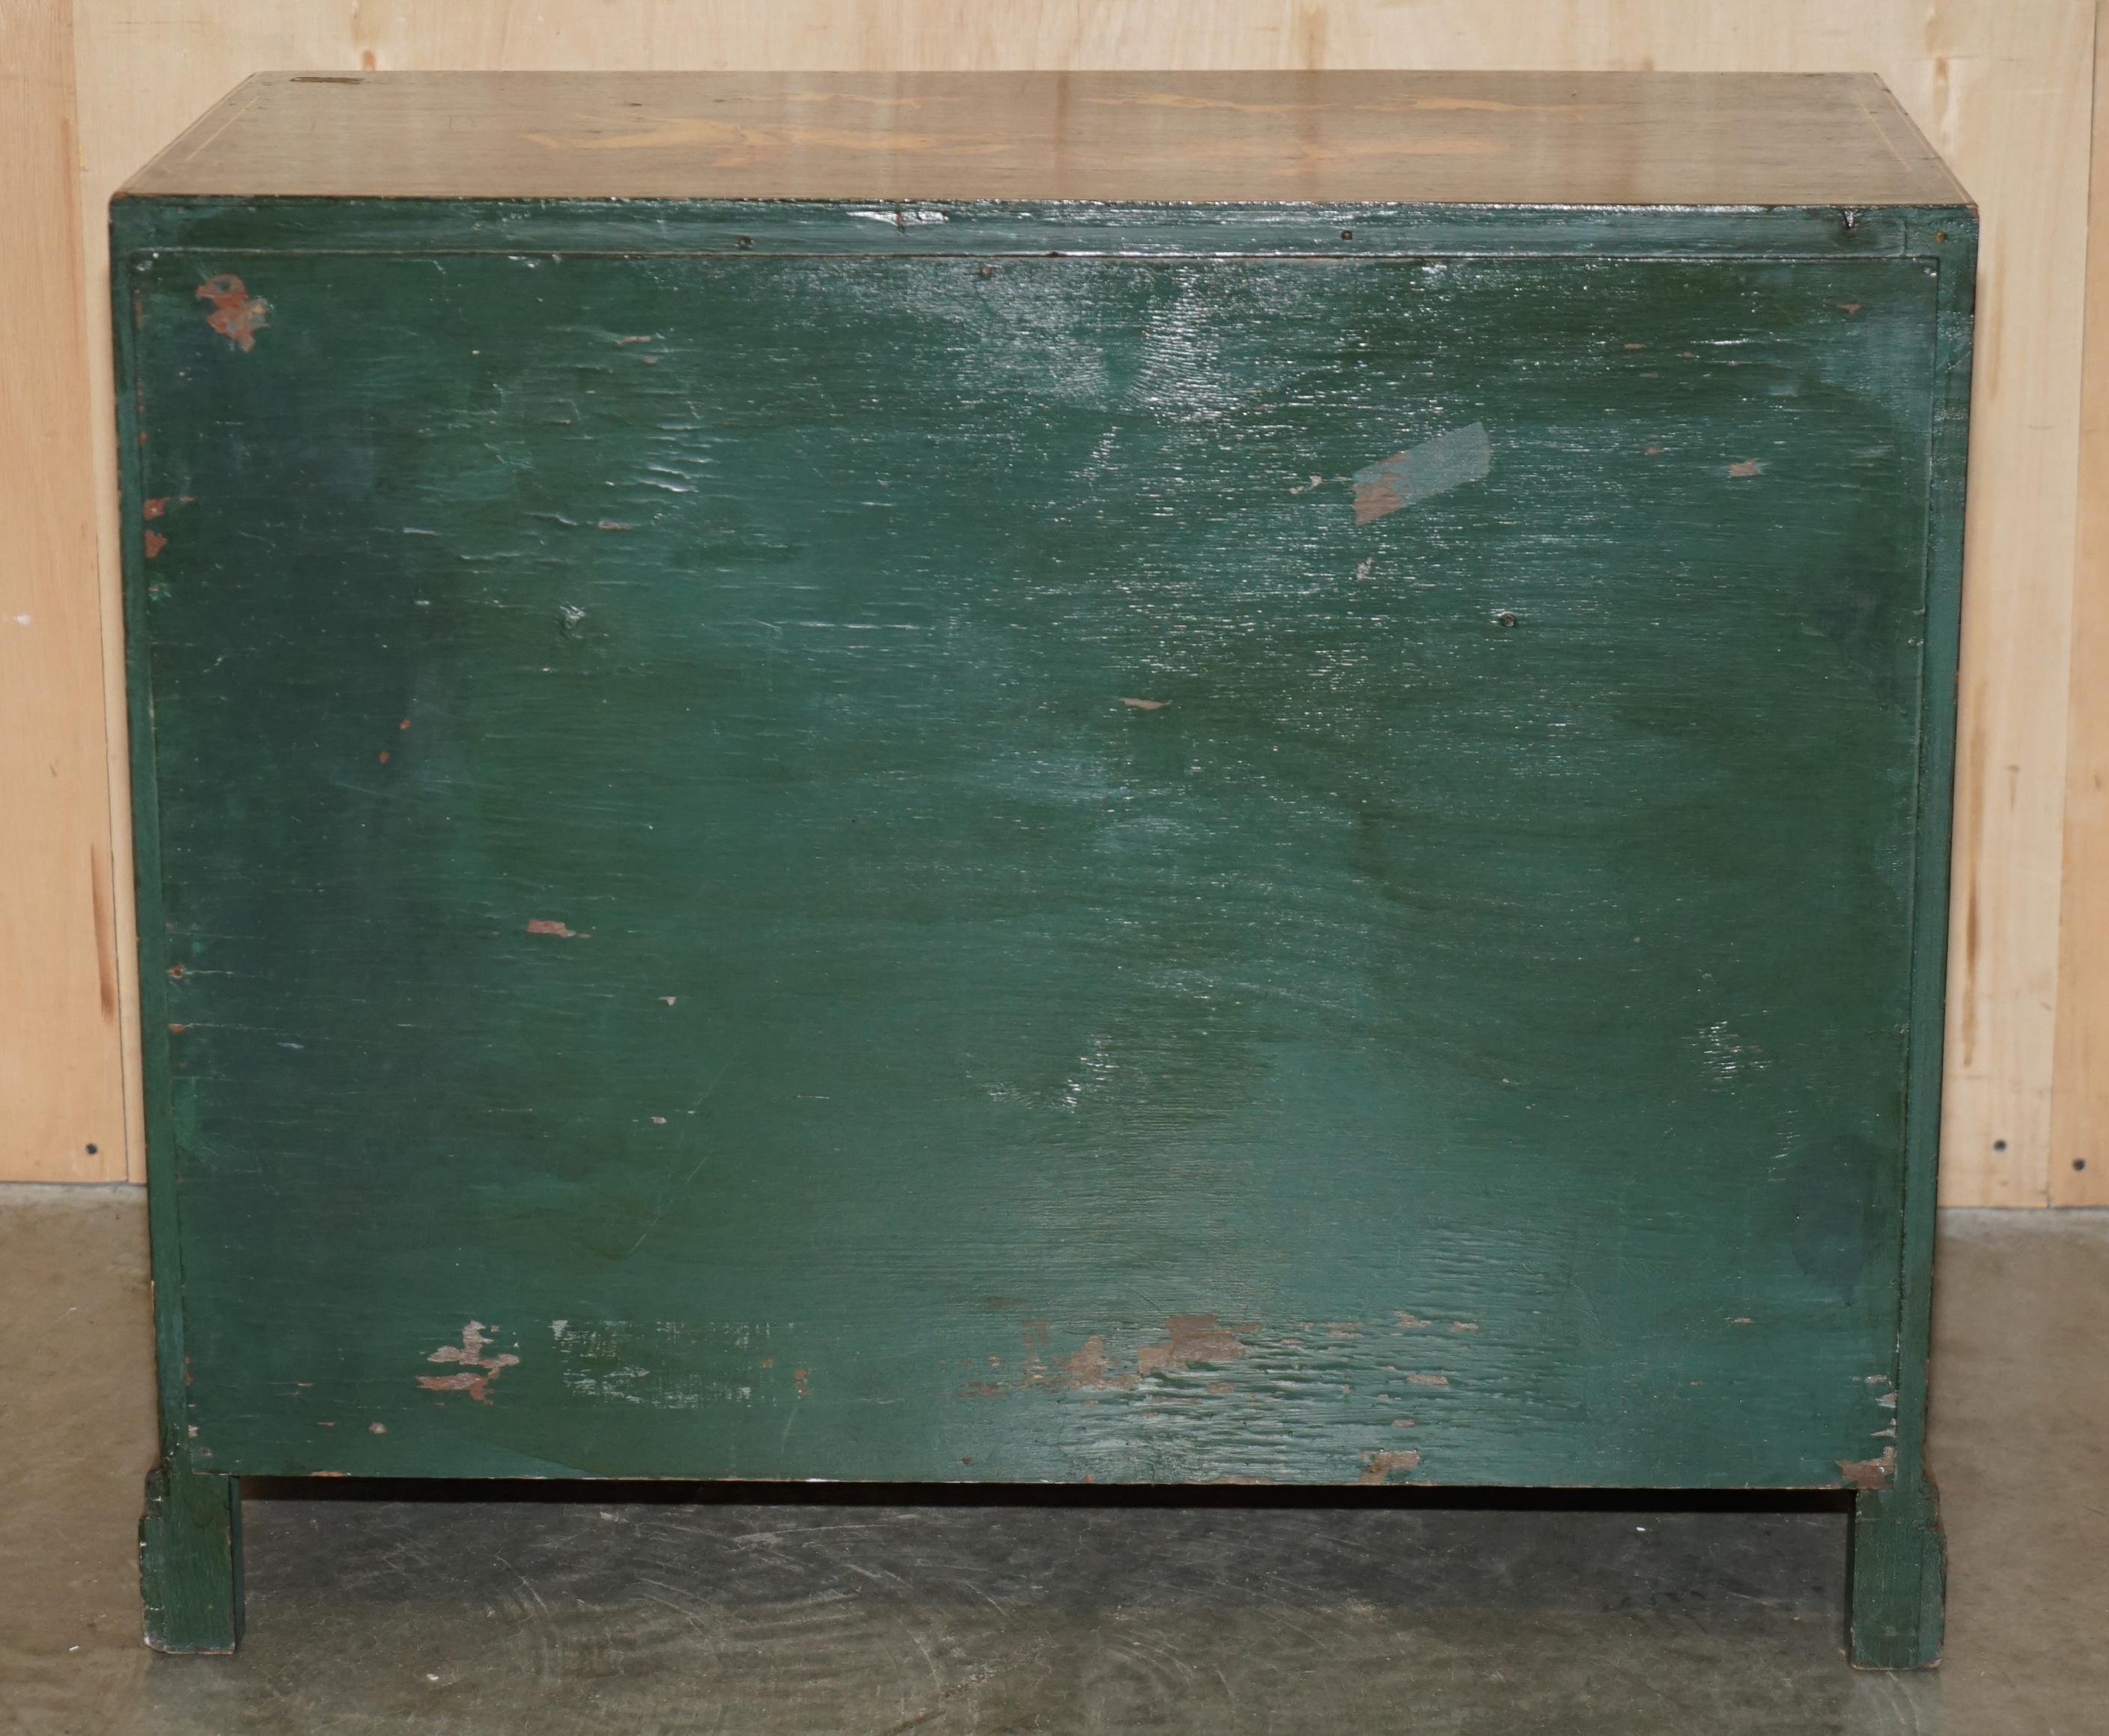 LOVELY ANTiQUE CHEST OF DRAWERS PAINTES EN GREEN DEPICTING HORSE & RIDER CIRCA 1900 en vente 8